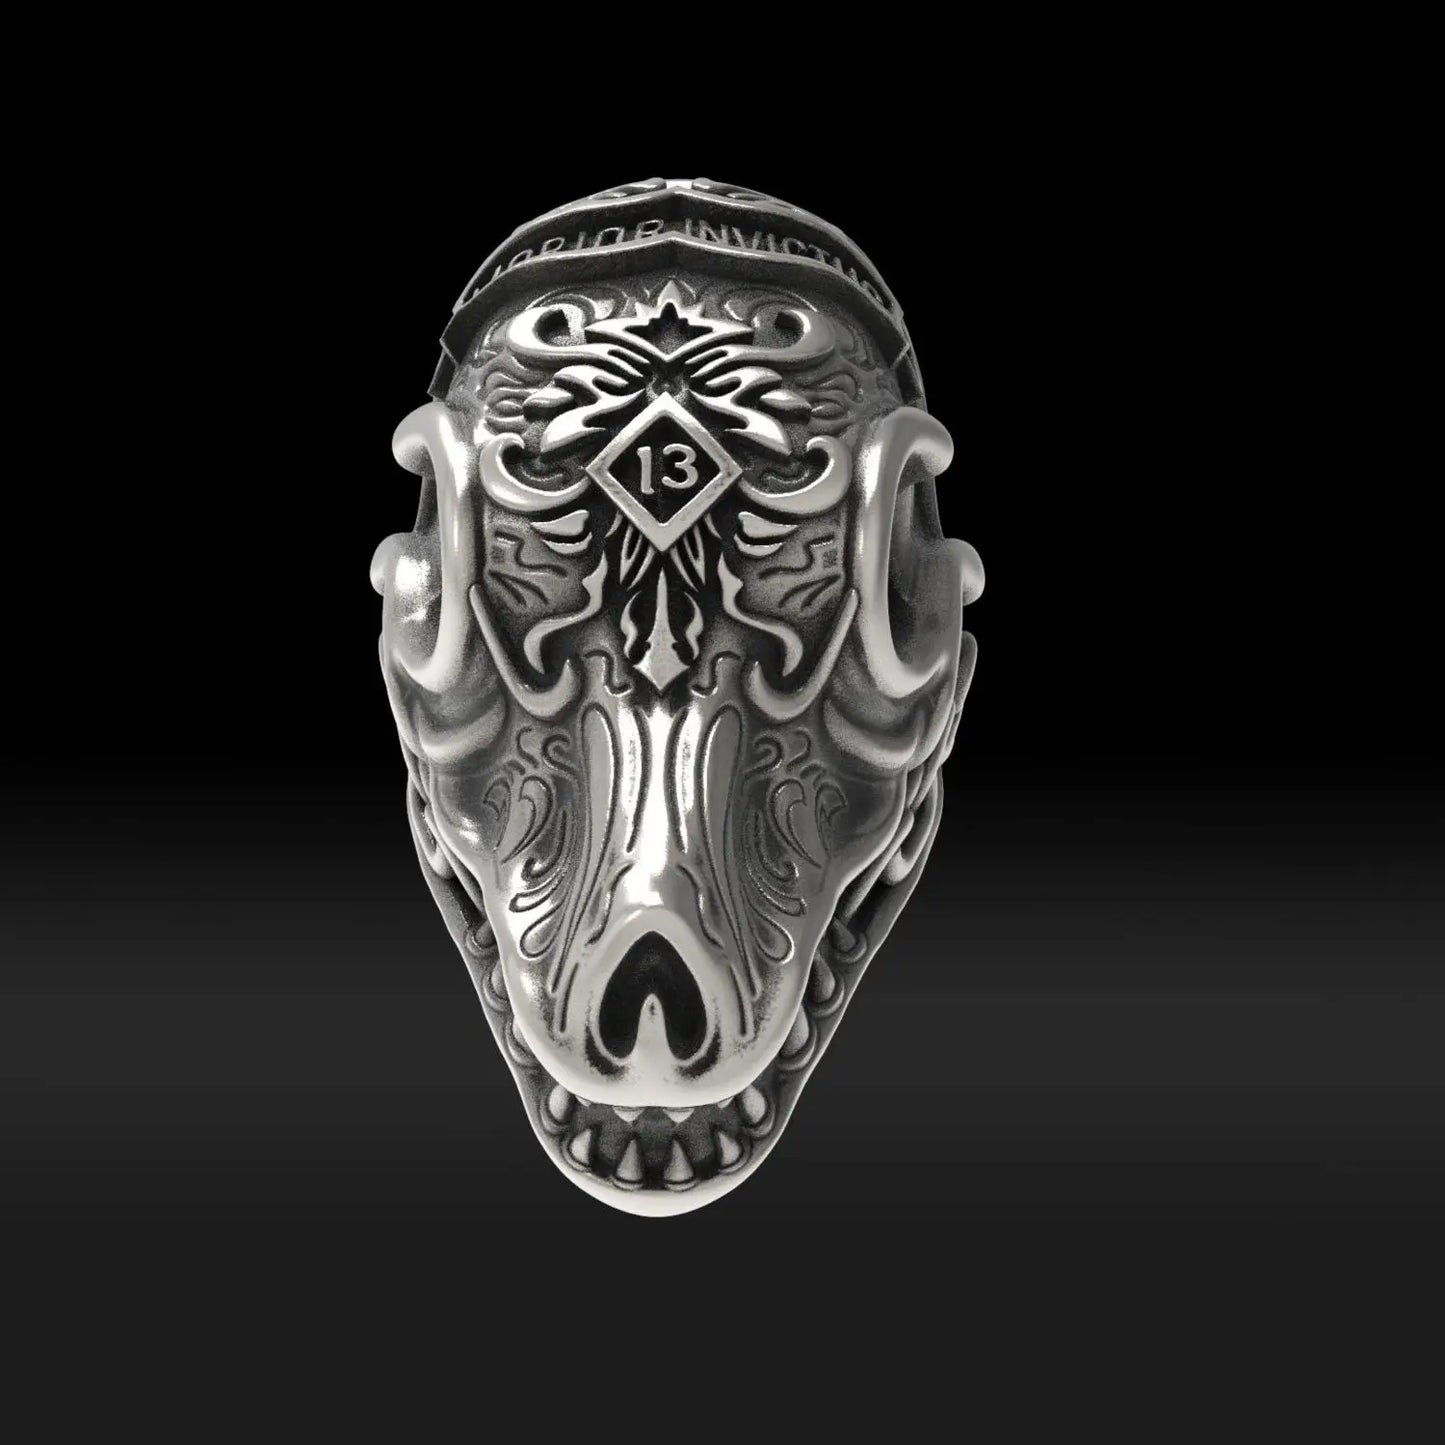 Morior Invictus Ring - Oxidized Faith Jewelry for Men by SanLan